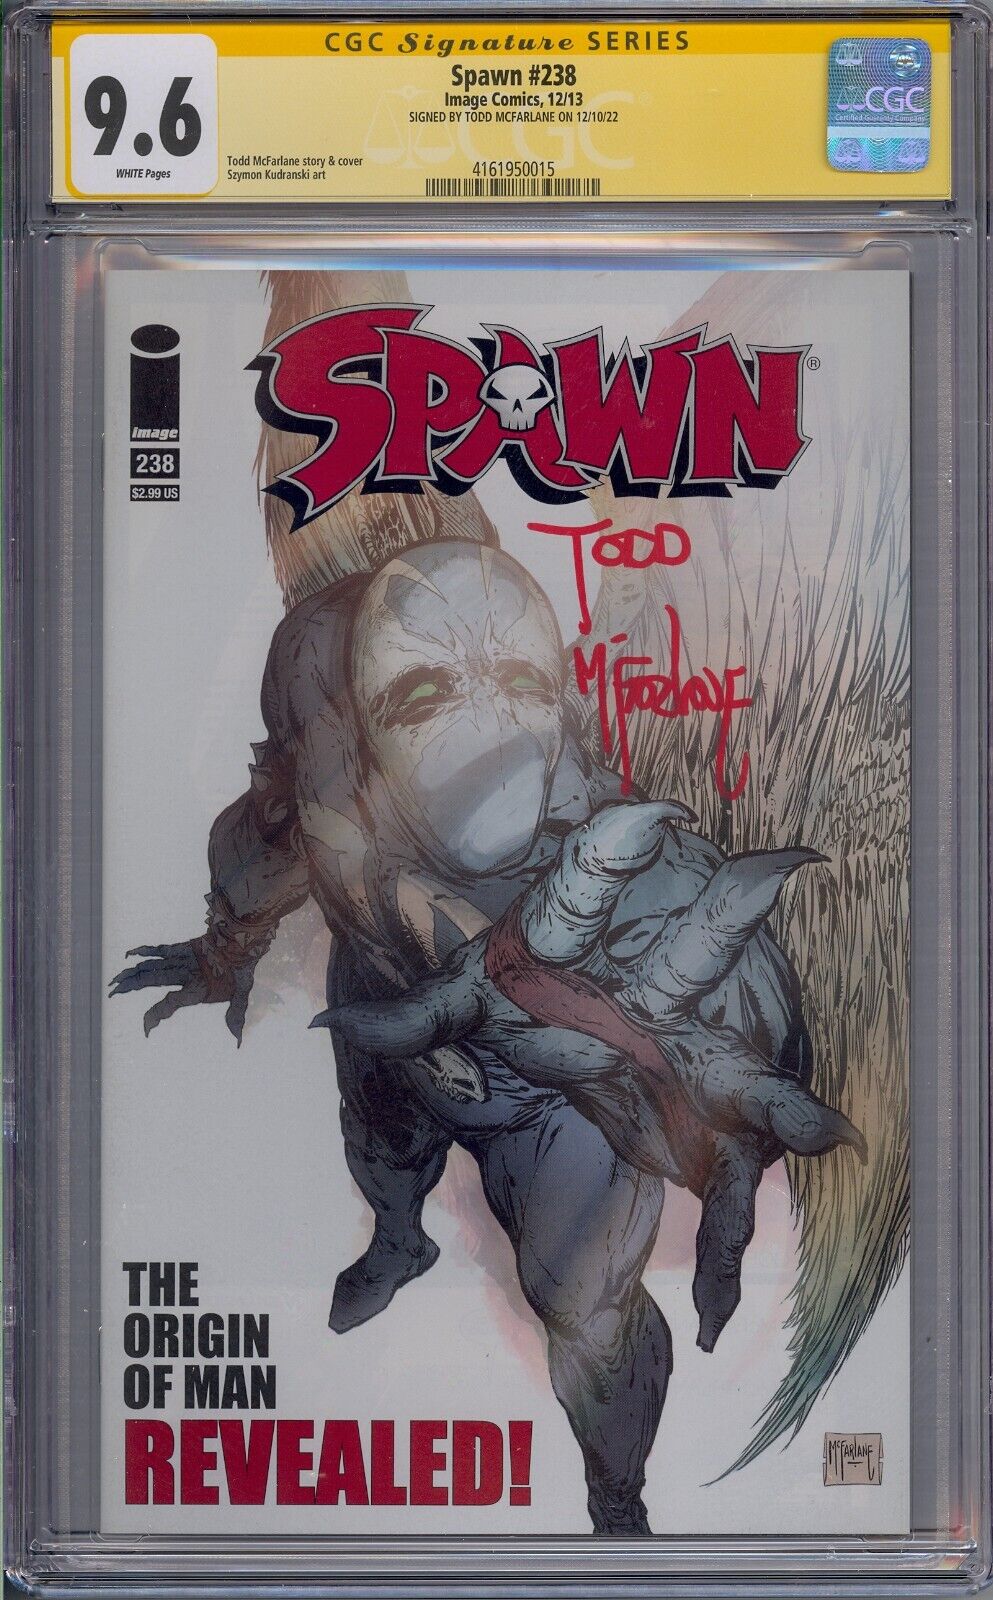 SPAWN #238 CGC 9.6 SS SIGNED MCFARLANE FULL SIGNATURE WHITE PAGES